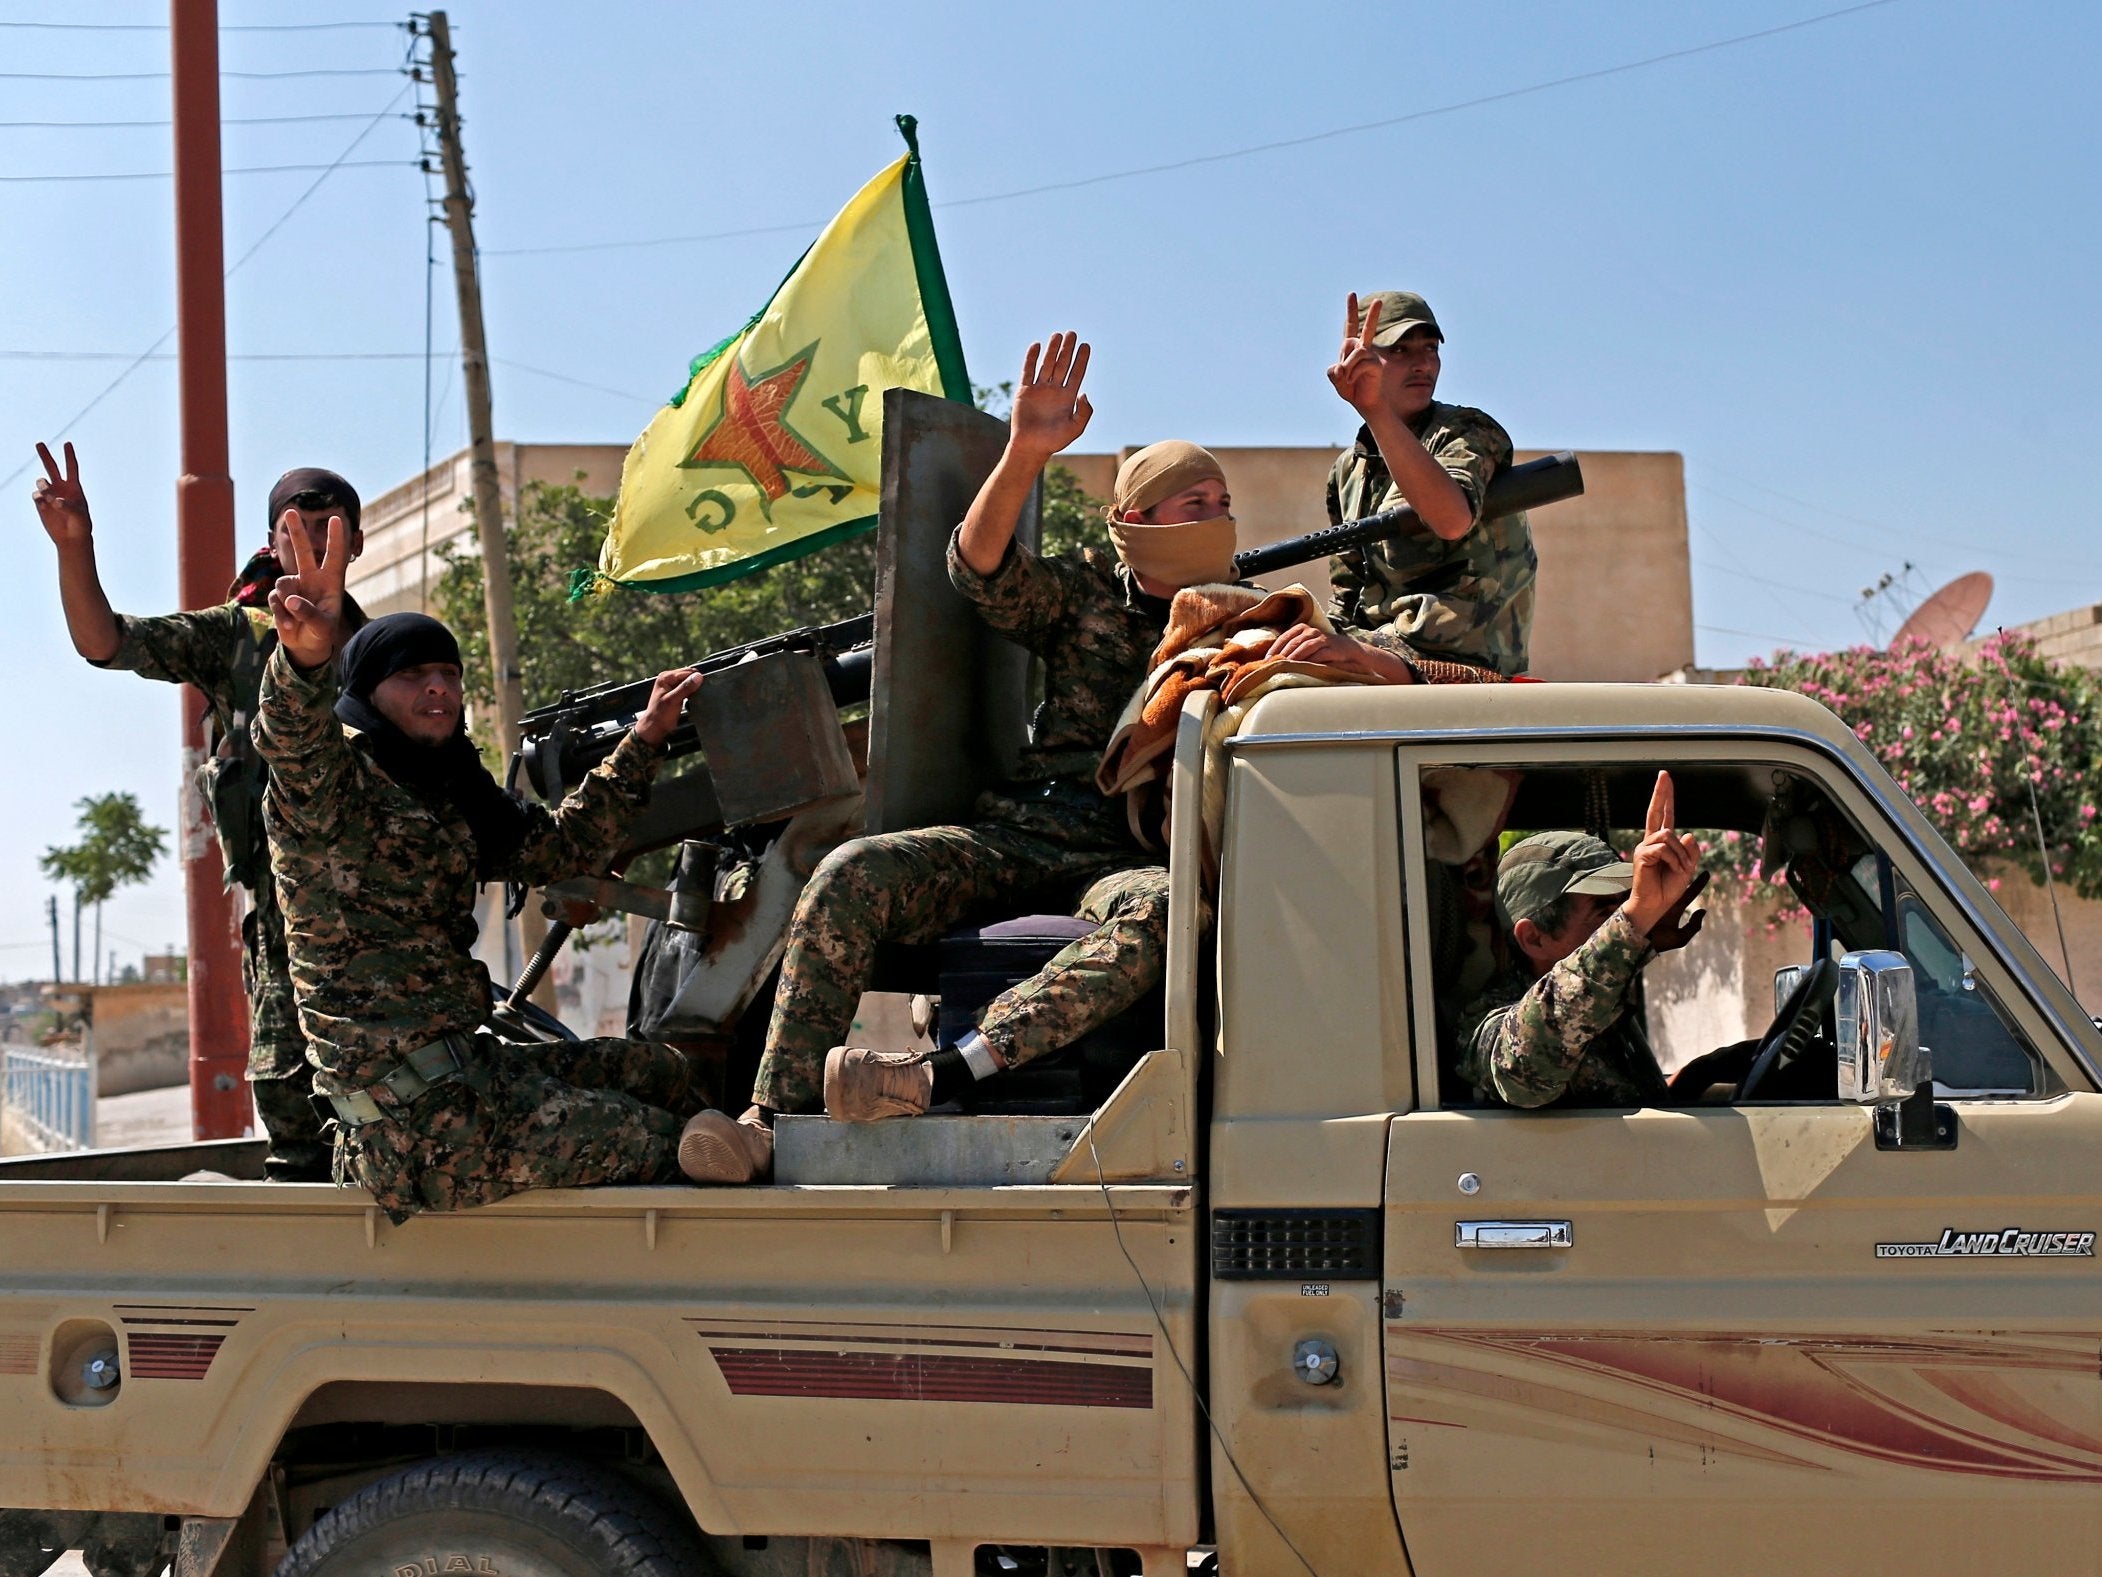 Members of the Kurdish People’s Protection Units (YPG) asked the Syrian army to take control of Manbij, according to state television